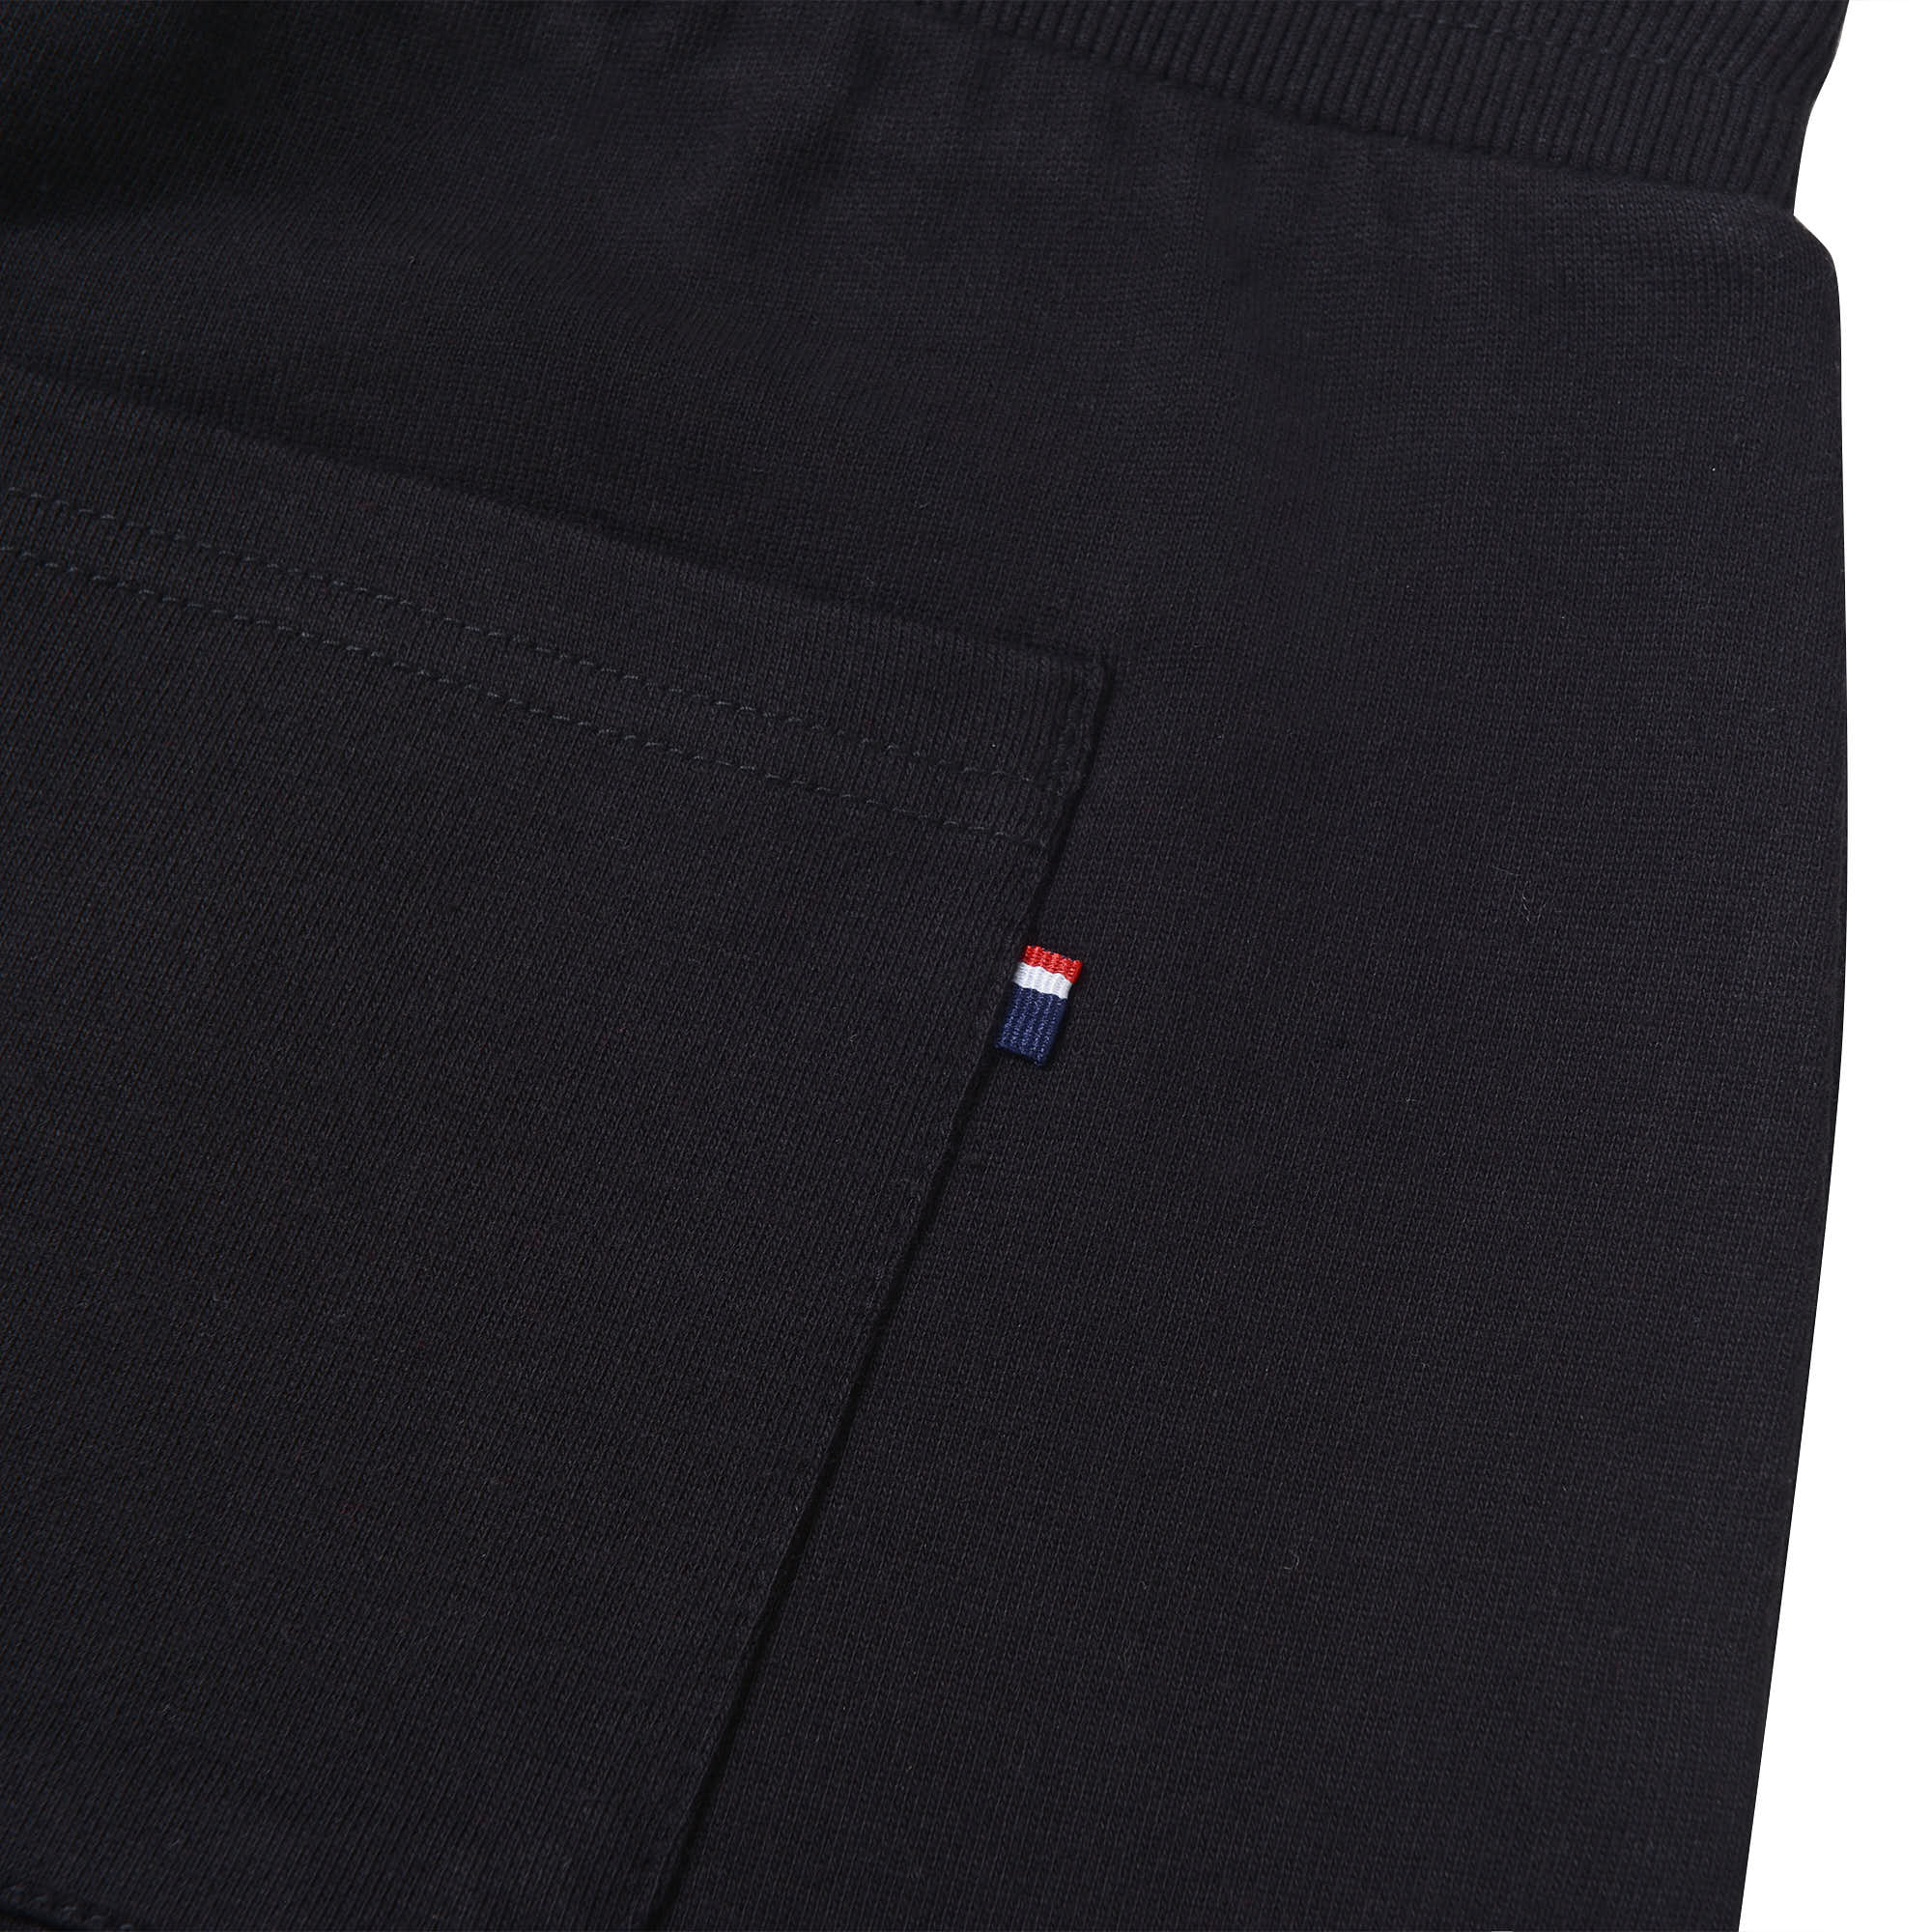 Mens Jersey Shorts in Black